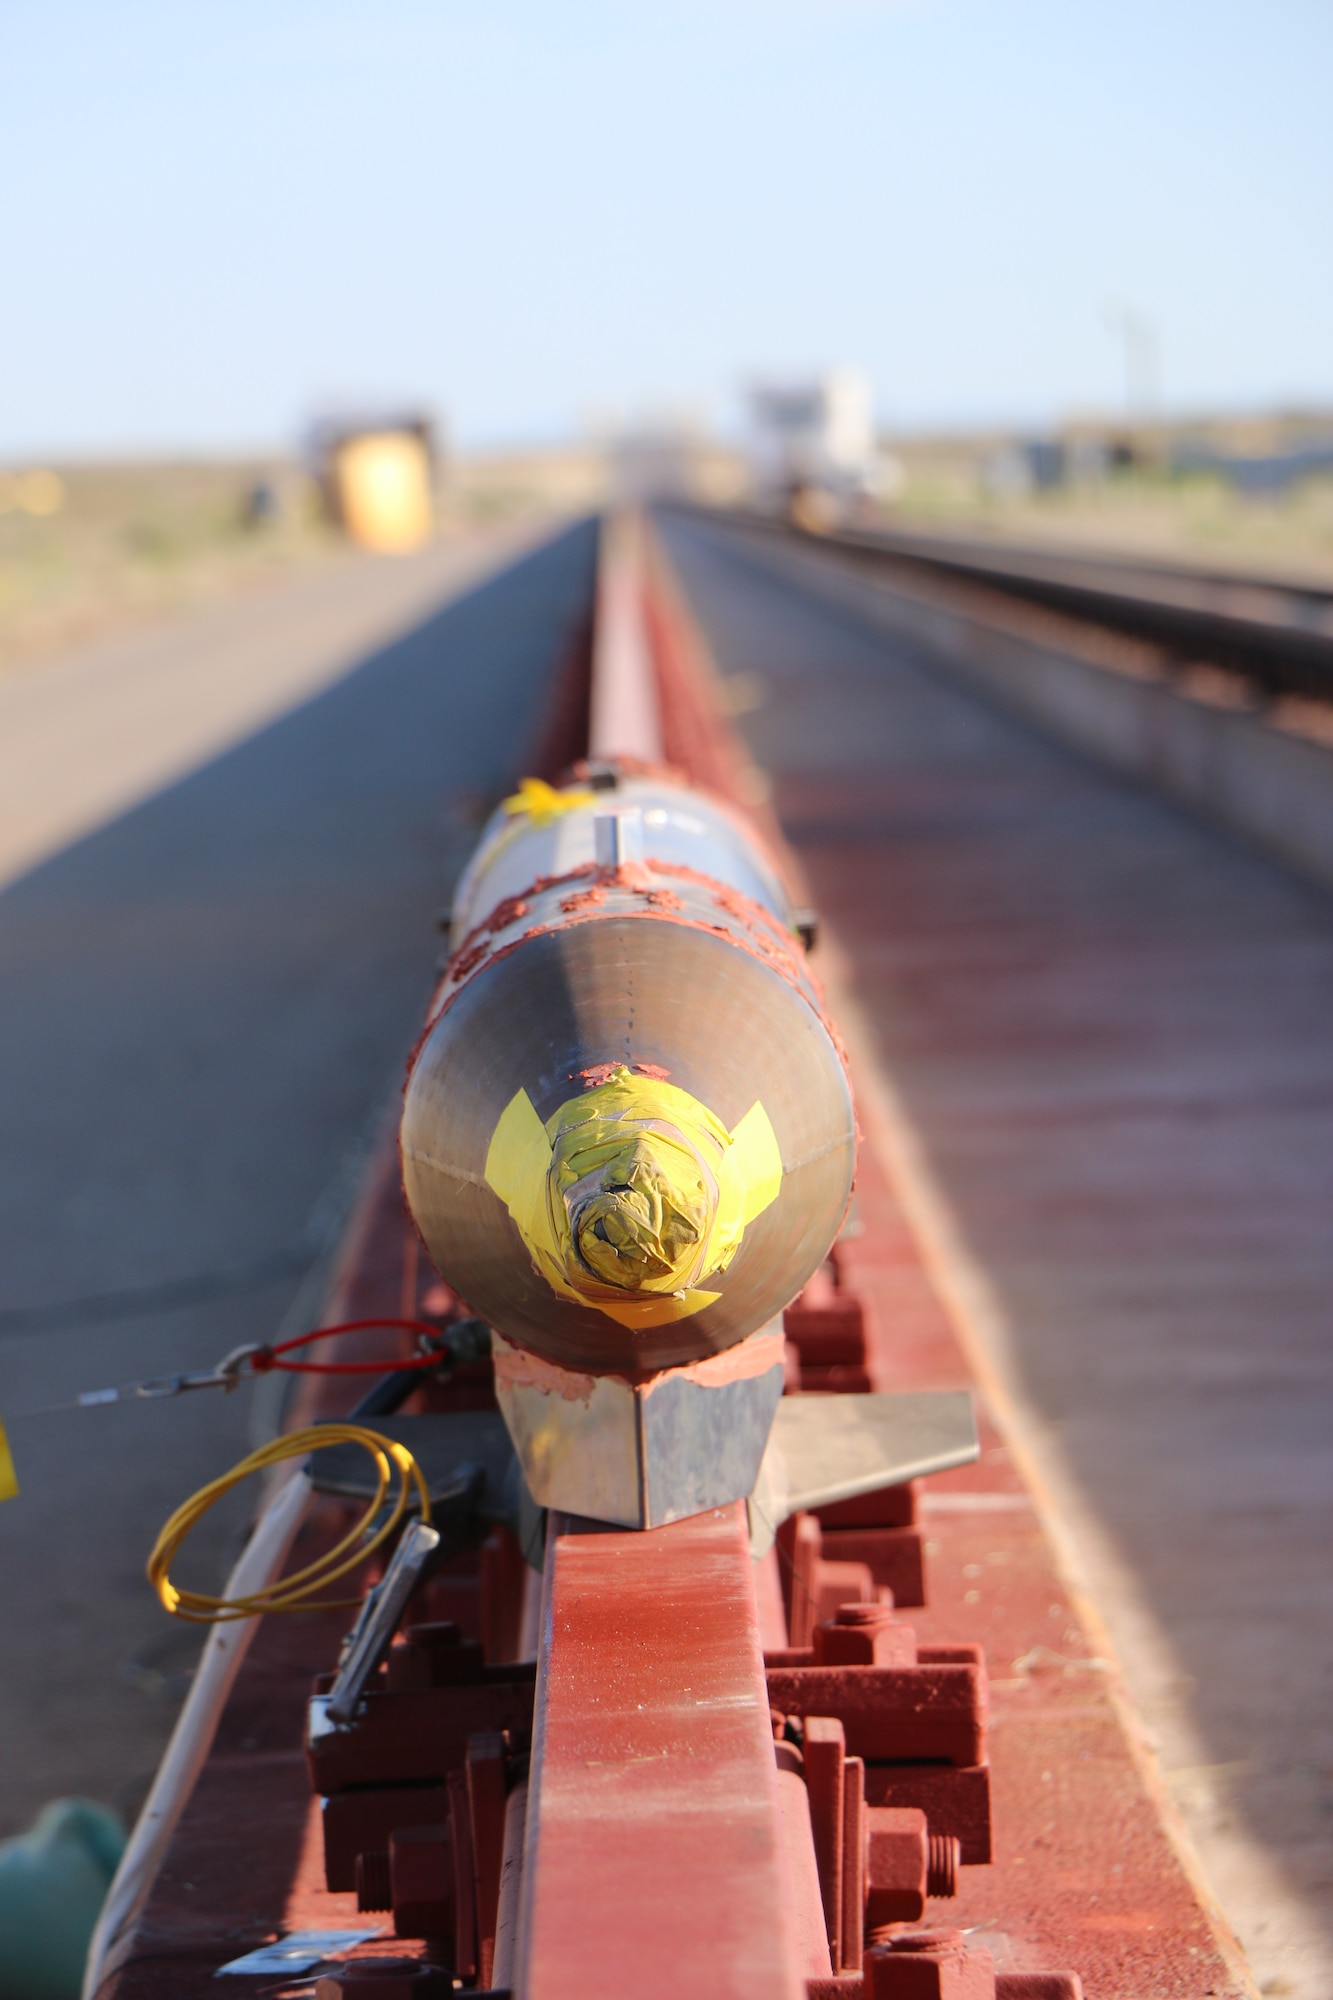 A rocket sled is shown just before launch on the Holloman High Speed Test Track at Holloman Air Force Base, New Mexico. The 9-inch monorail sled was launched as part of the Hypersonic Readiness program, which is a series of tests being conducted by the 846th Test Squadron at Holloman to prepare for future rocket sled testing to support programs and projects including the Hypersonic Test and Evaluation Investment Portfolio and the Air-Launched Rapid Response Weapon, as well as hypersonic sled tests for other customers. (U.S. Air Force photo)